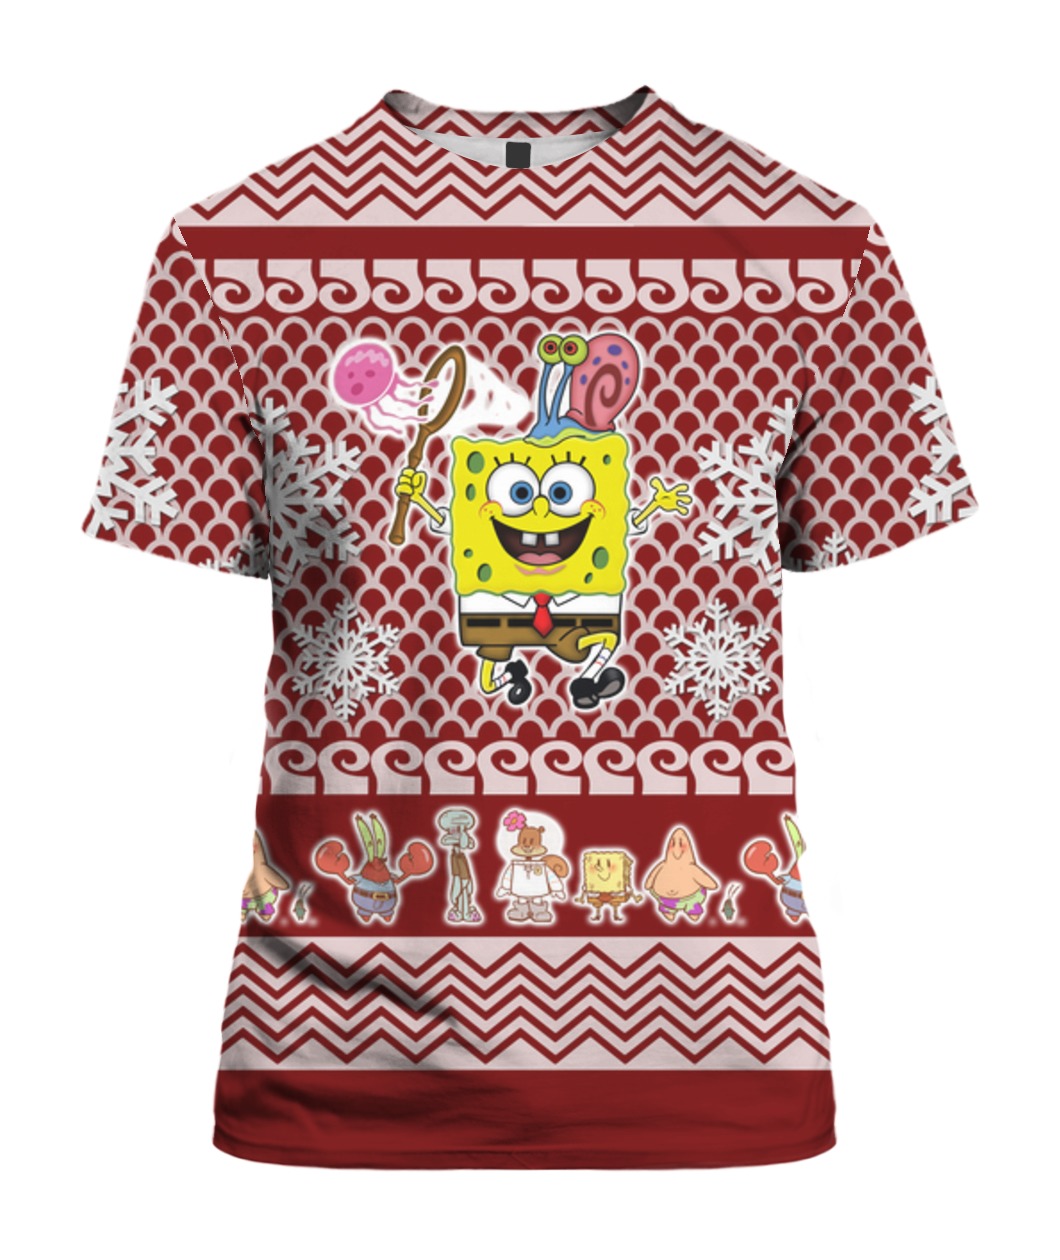 Red Louis Vuitton Spongebob Squarepants 3D Hoodie Cartoon Ugly Christmas  Sweater - Family Gift Ideas That Everyone Will Enjoy